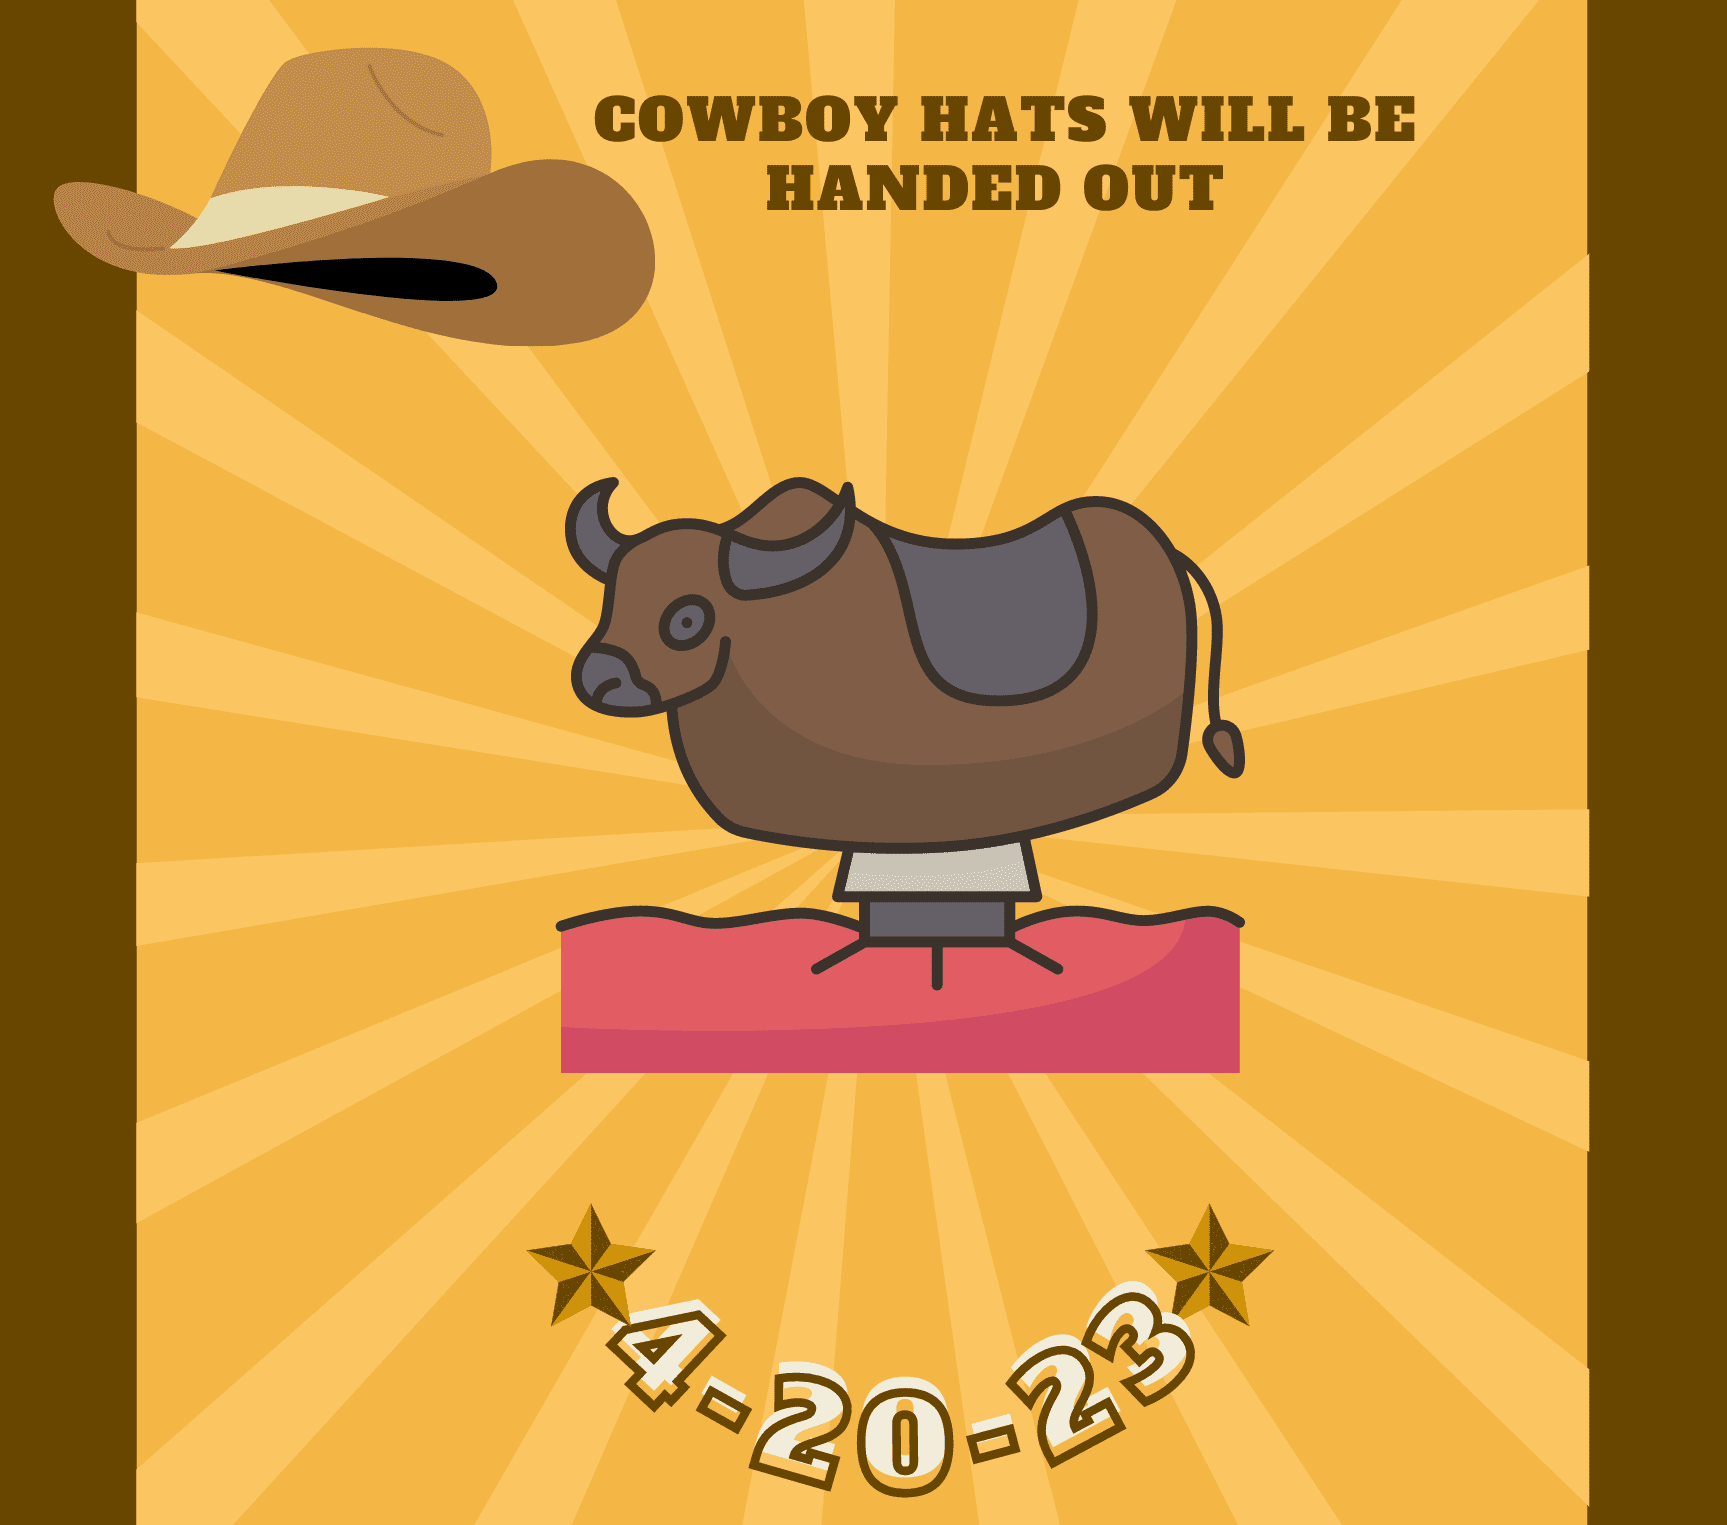 Come Ride The Mechanical Bull Cowboy hats will be handed out April 20, 2023 10:00 am - 2:00 pm at the student Center Cafe